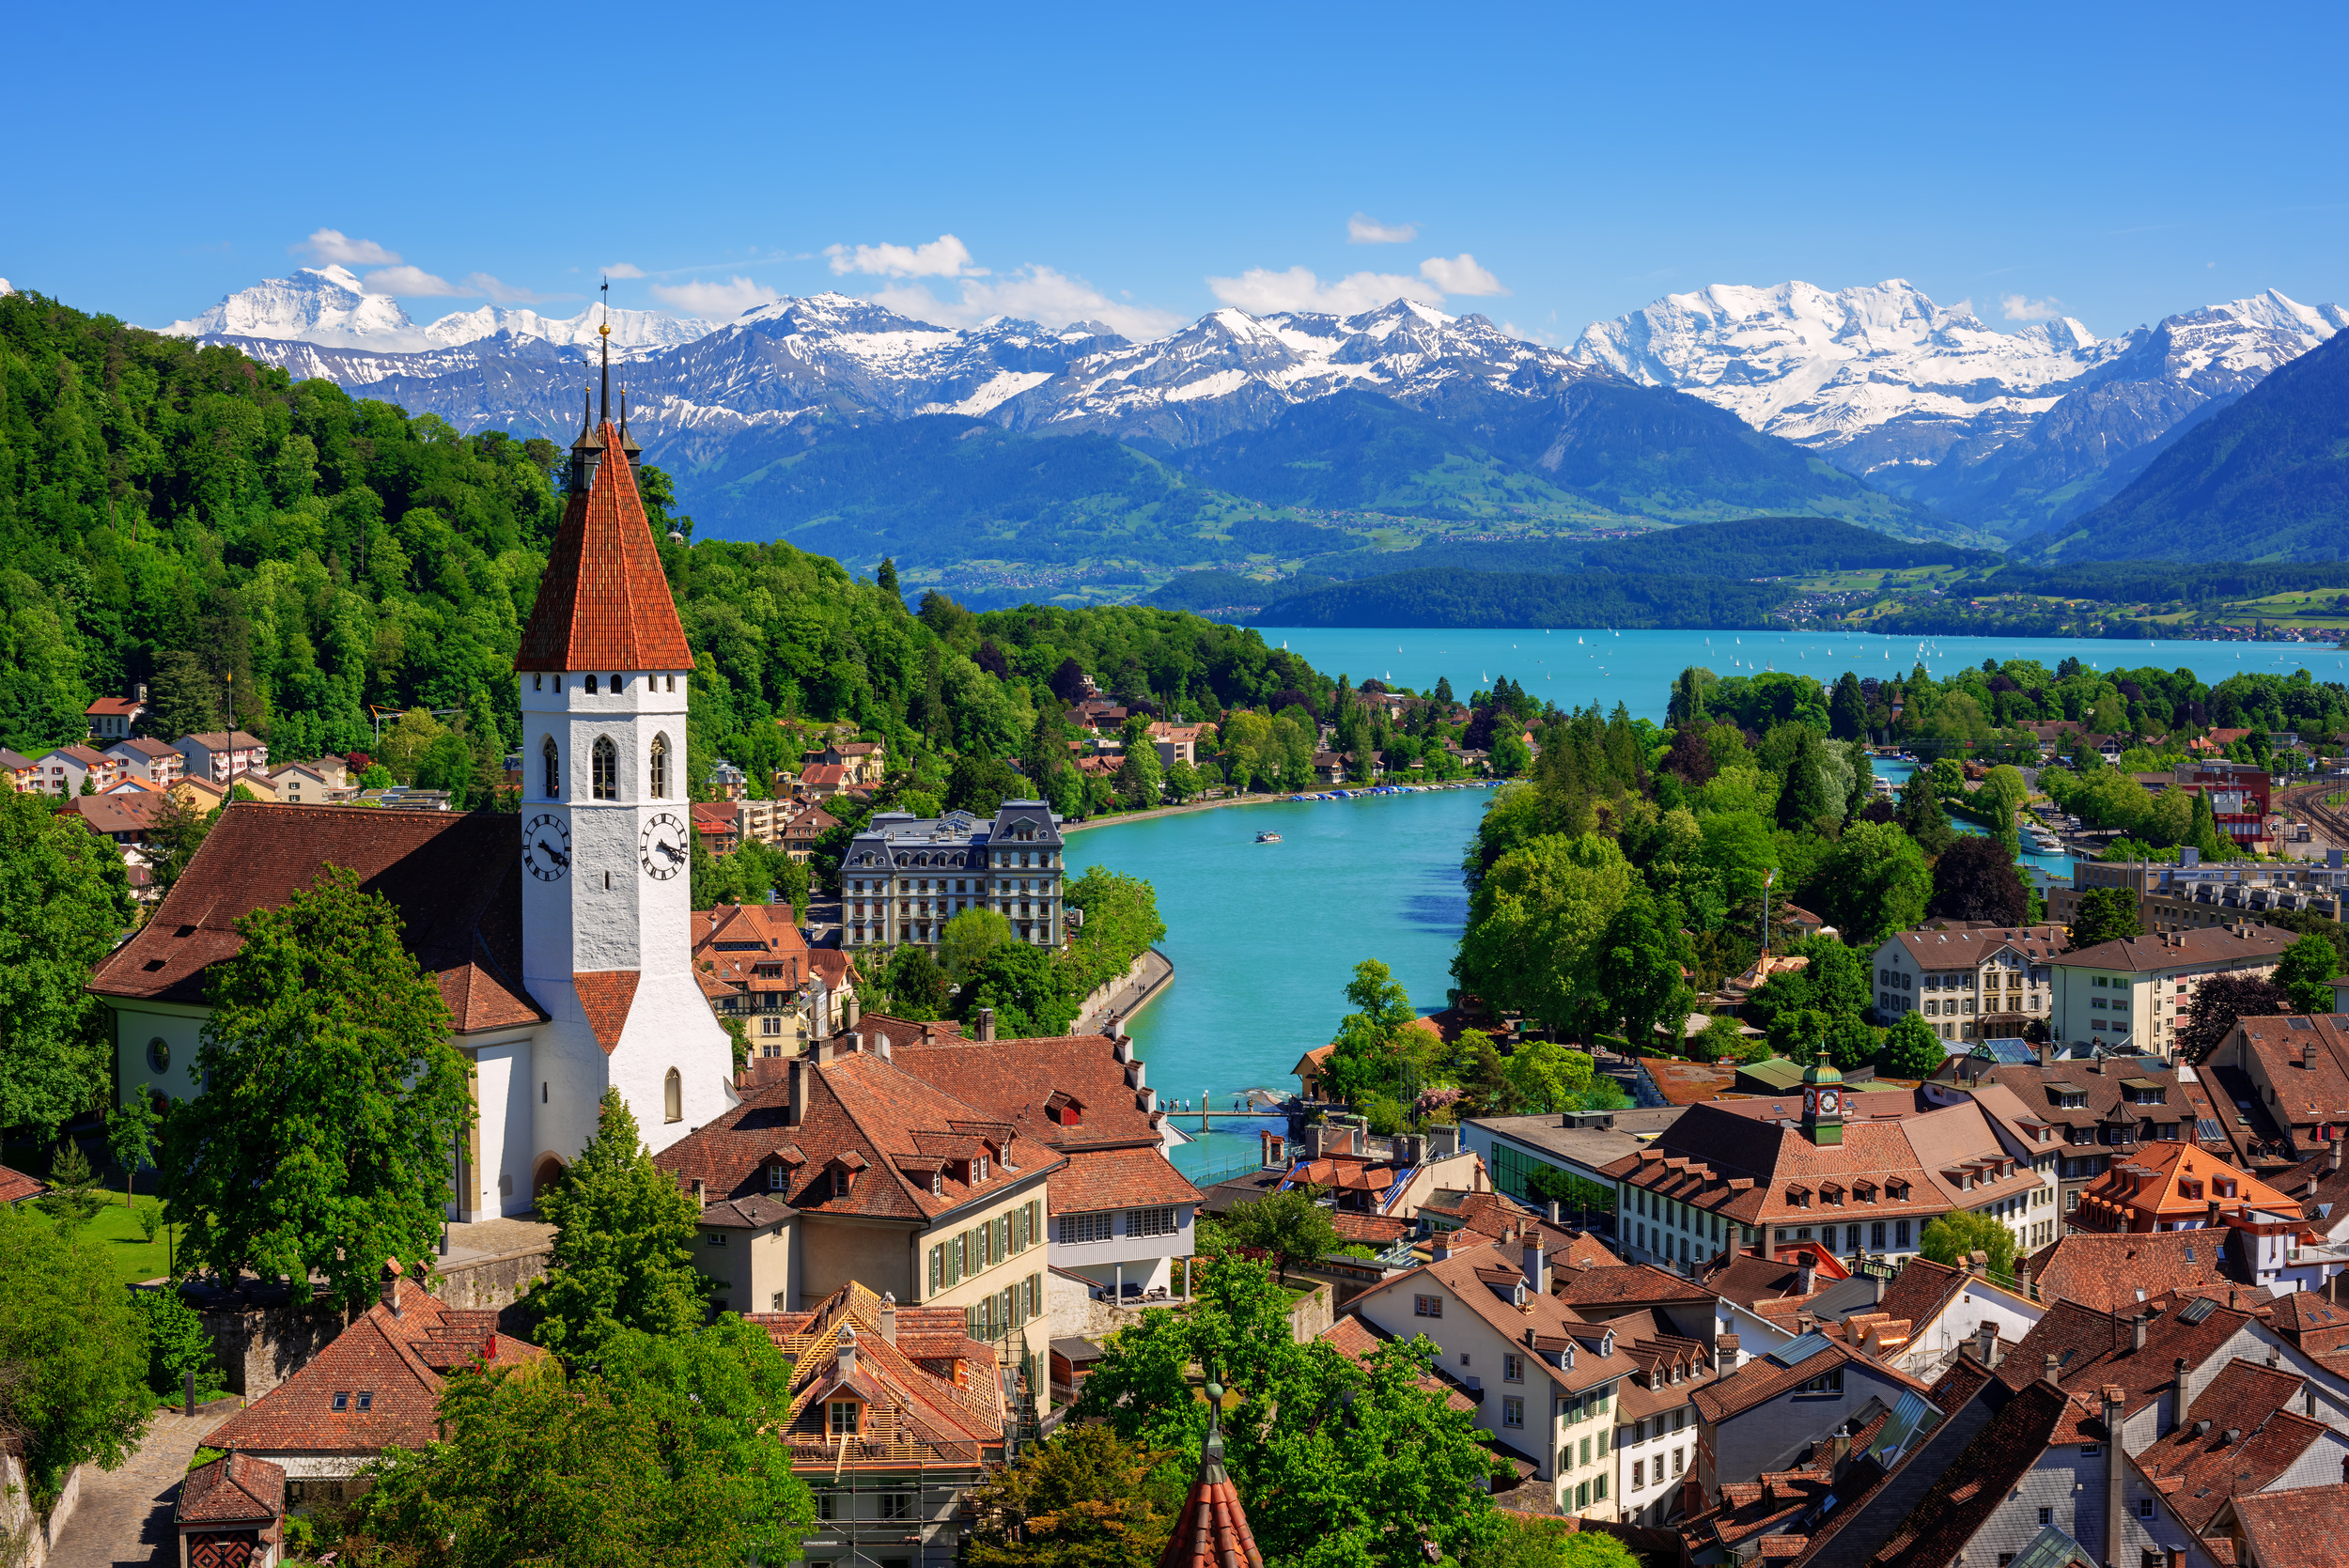 <p>Yet another European country with French as one of the official languages (the others are German, Italian, and Rhaeto-Romance). You’ll find French most useful in Geneva and the surrounding area, although it’s used throughout Switzerland.</p><p>You may also like: <a href='https://www.yardbarker.com/lifestyle/articles/the_20_best_small_towns_in_europe_121923/s1__38397859'>The 20 best small towns in Europe</a></p>